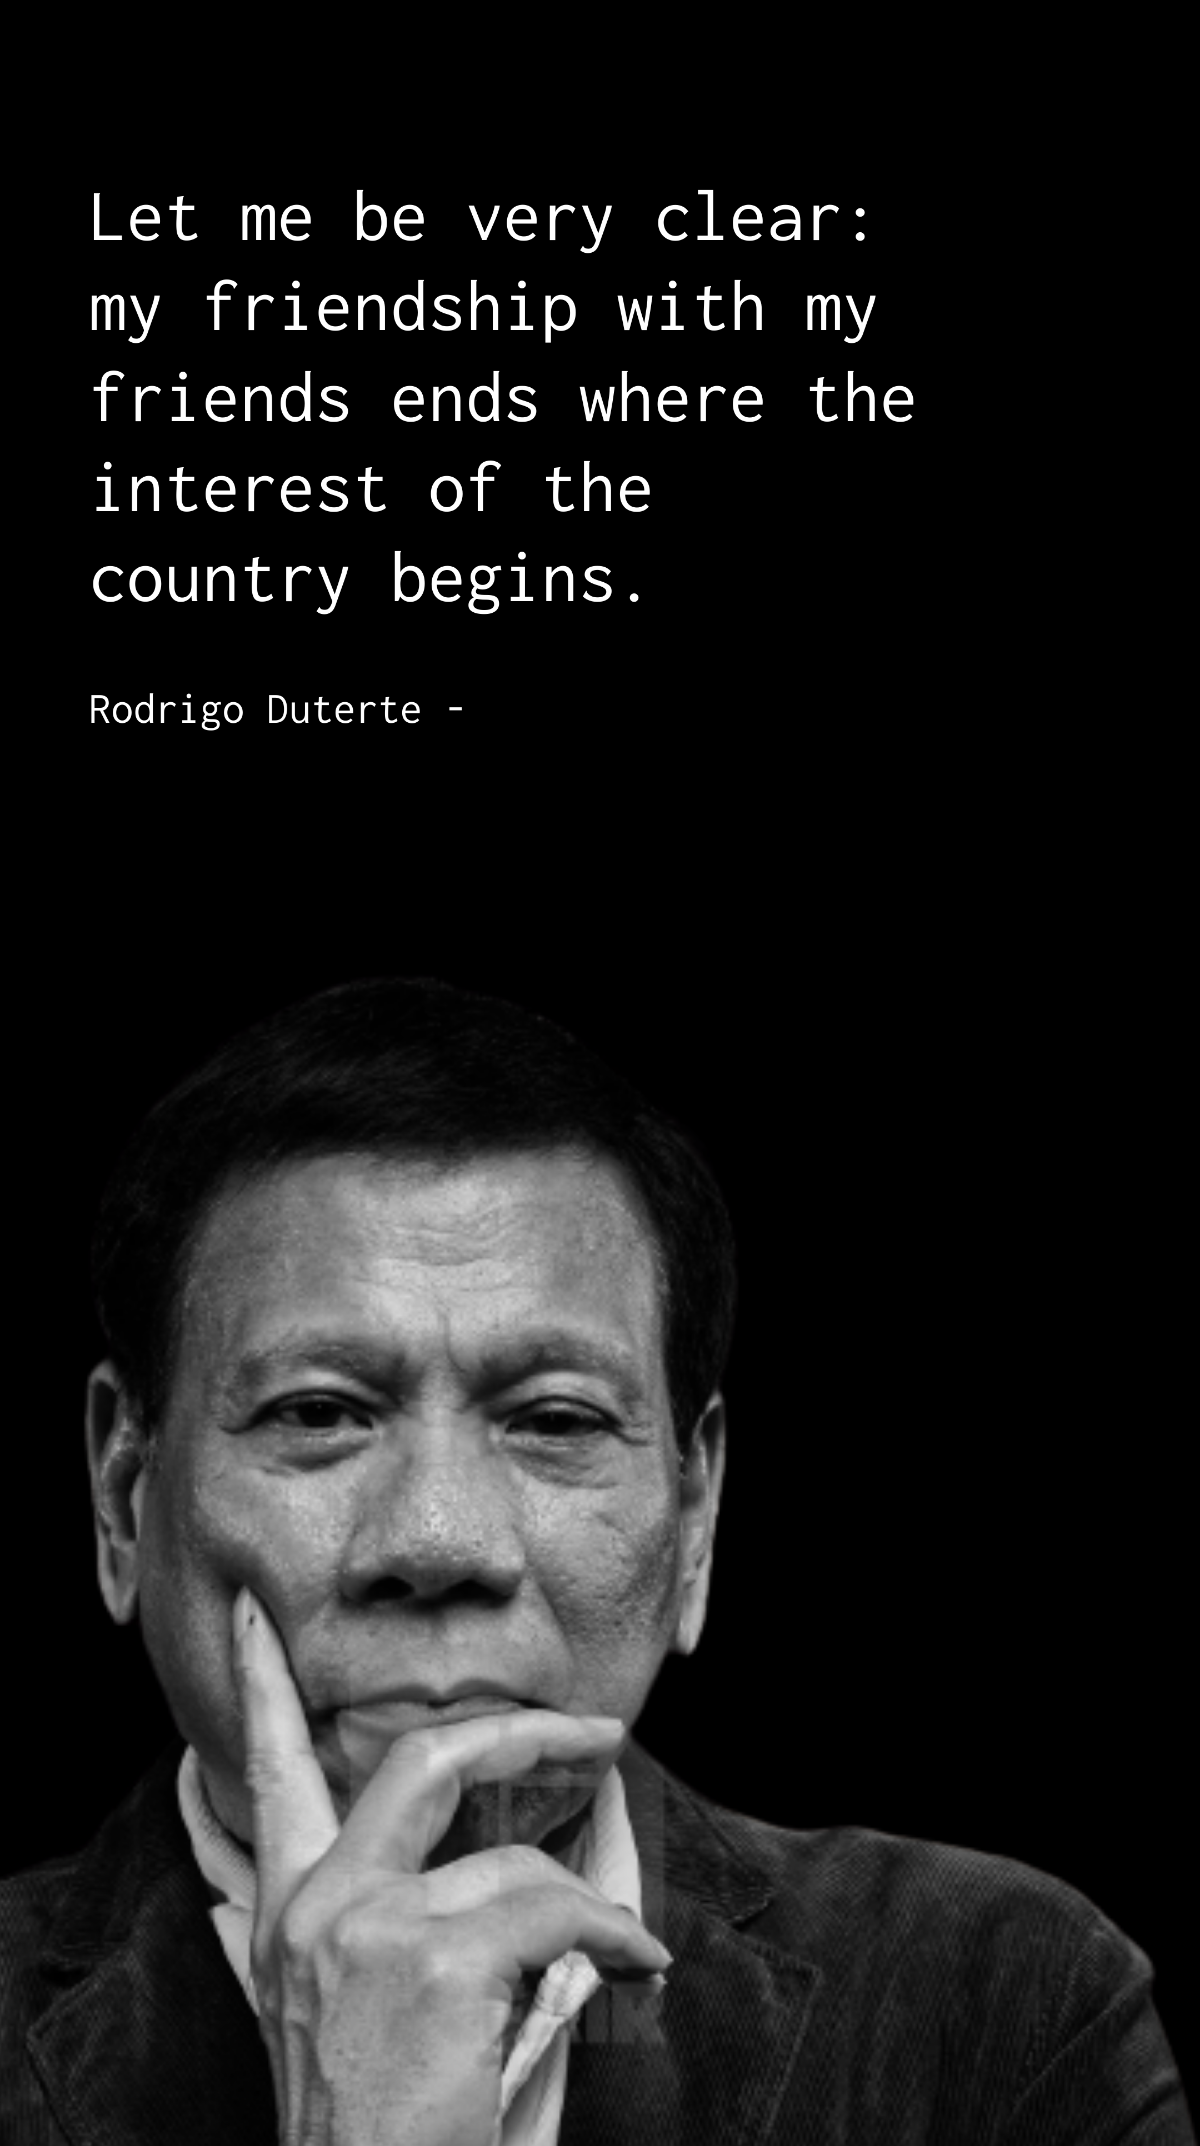 Rodrigo Duterte - Let me be very clear: my friendship with my friends ends where the interest of the country begins. Template